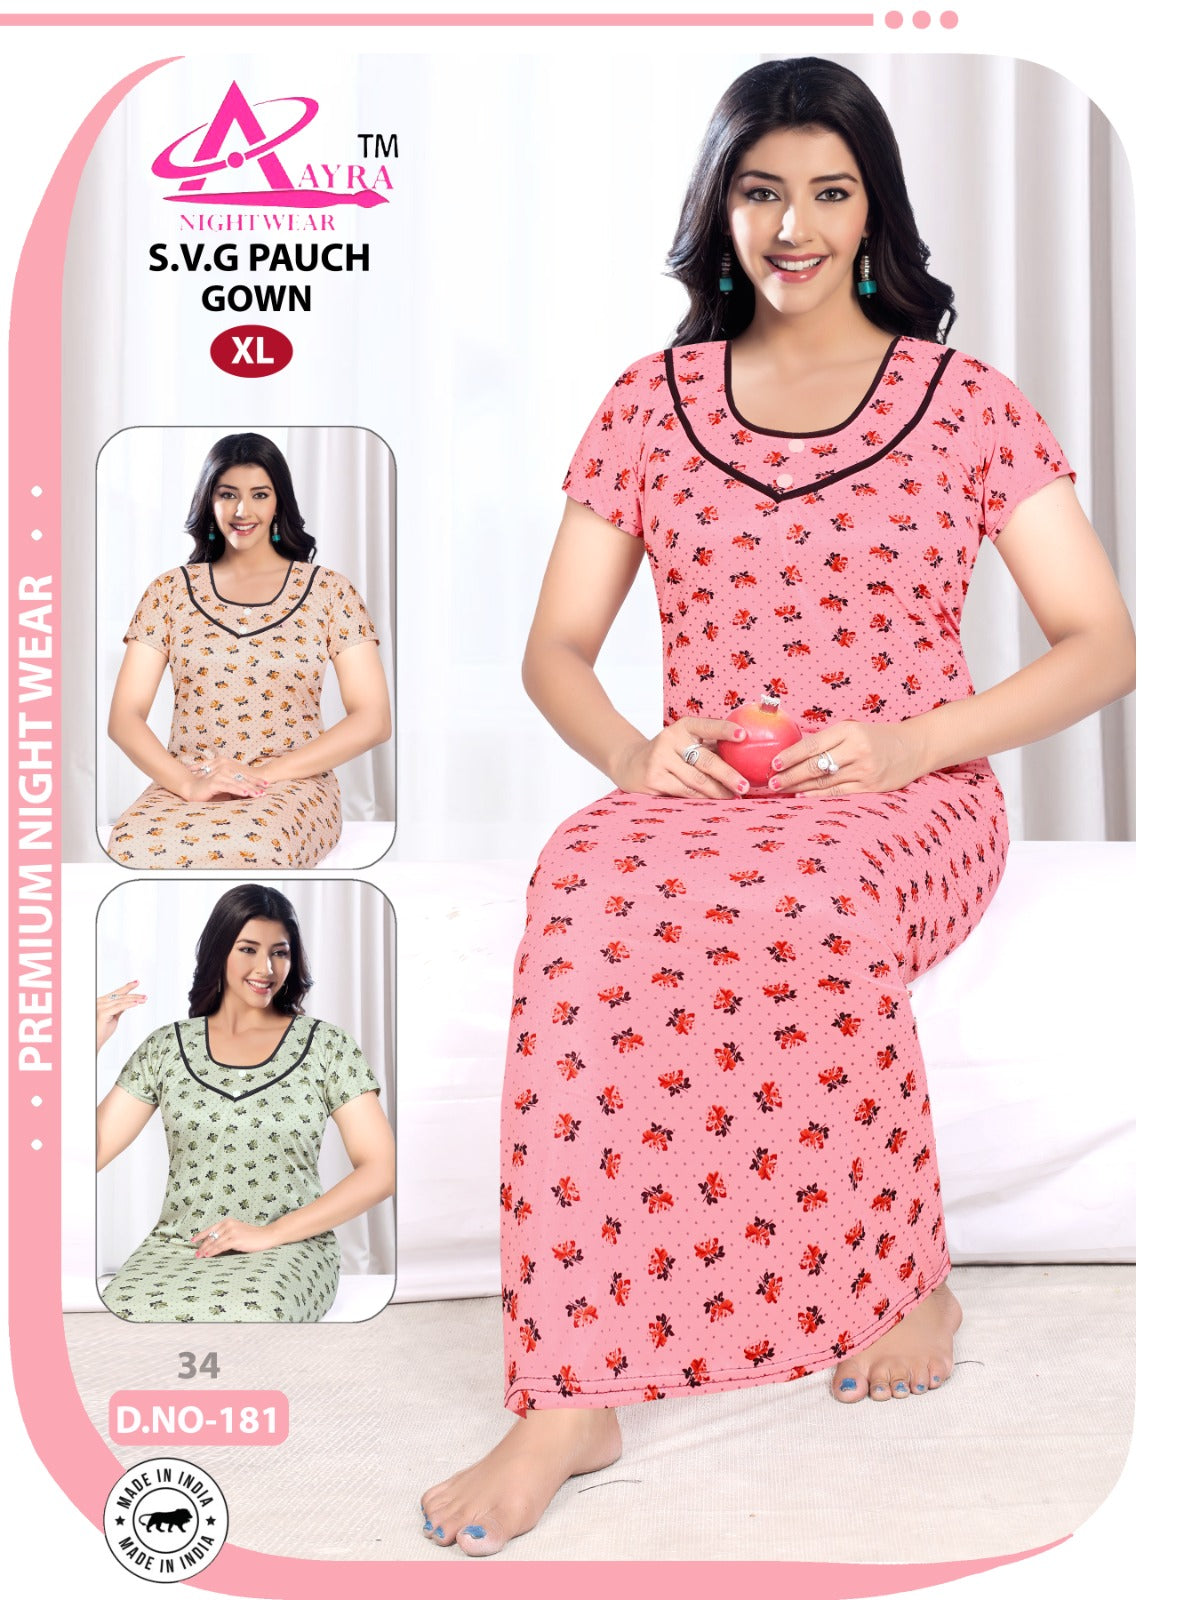 Svg Pauch Aayra Feeding Night Gown